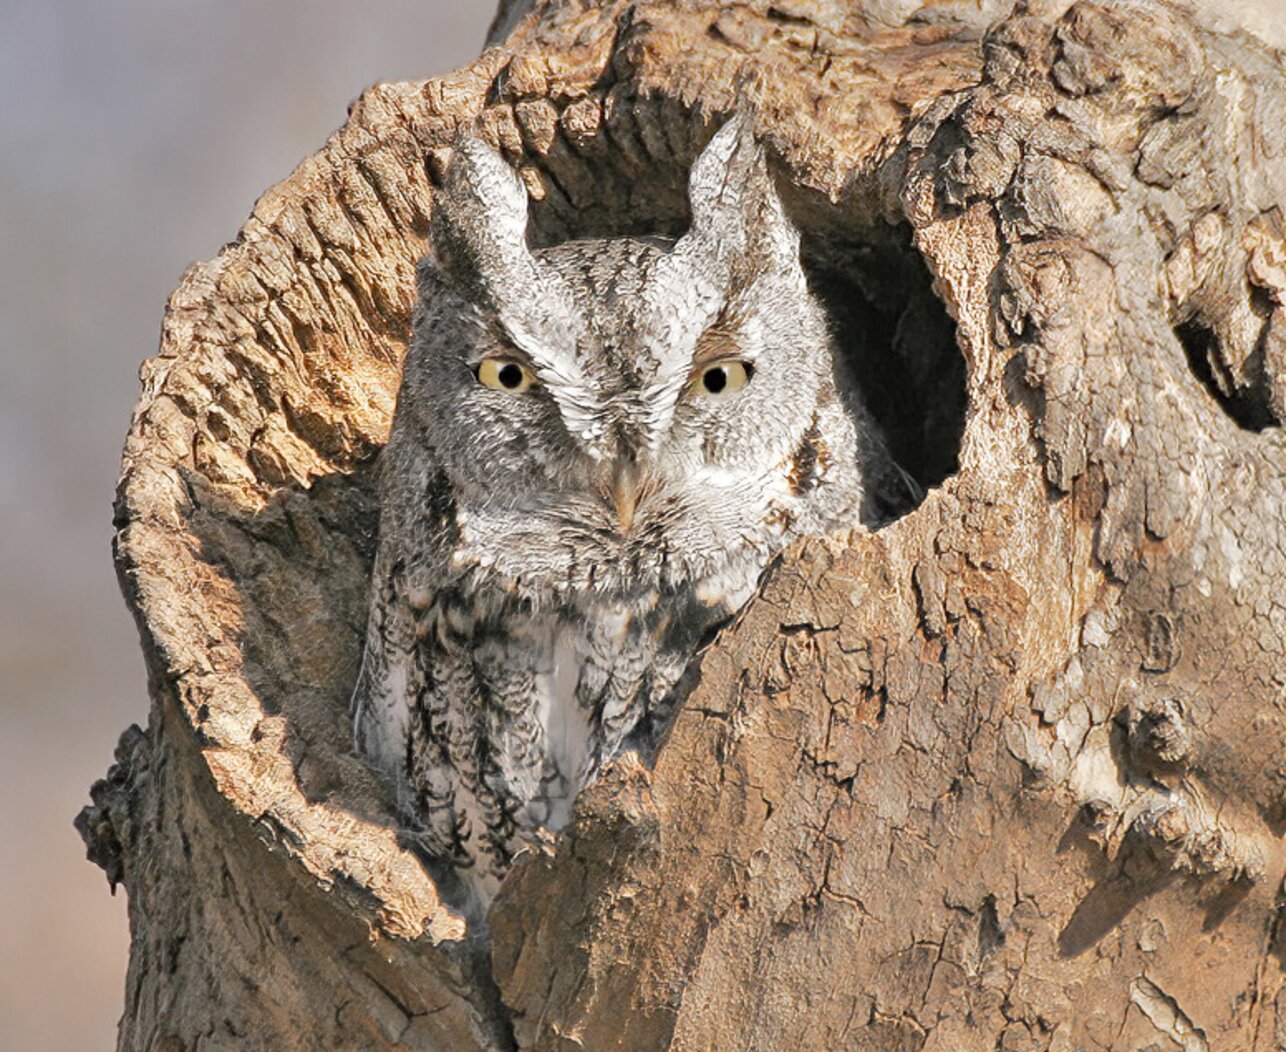 The haunting whinny of the Eastern Screech Owl can be heard in High Rock Park. Photo: David Speiser